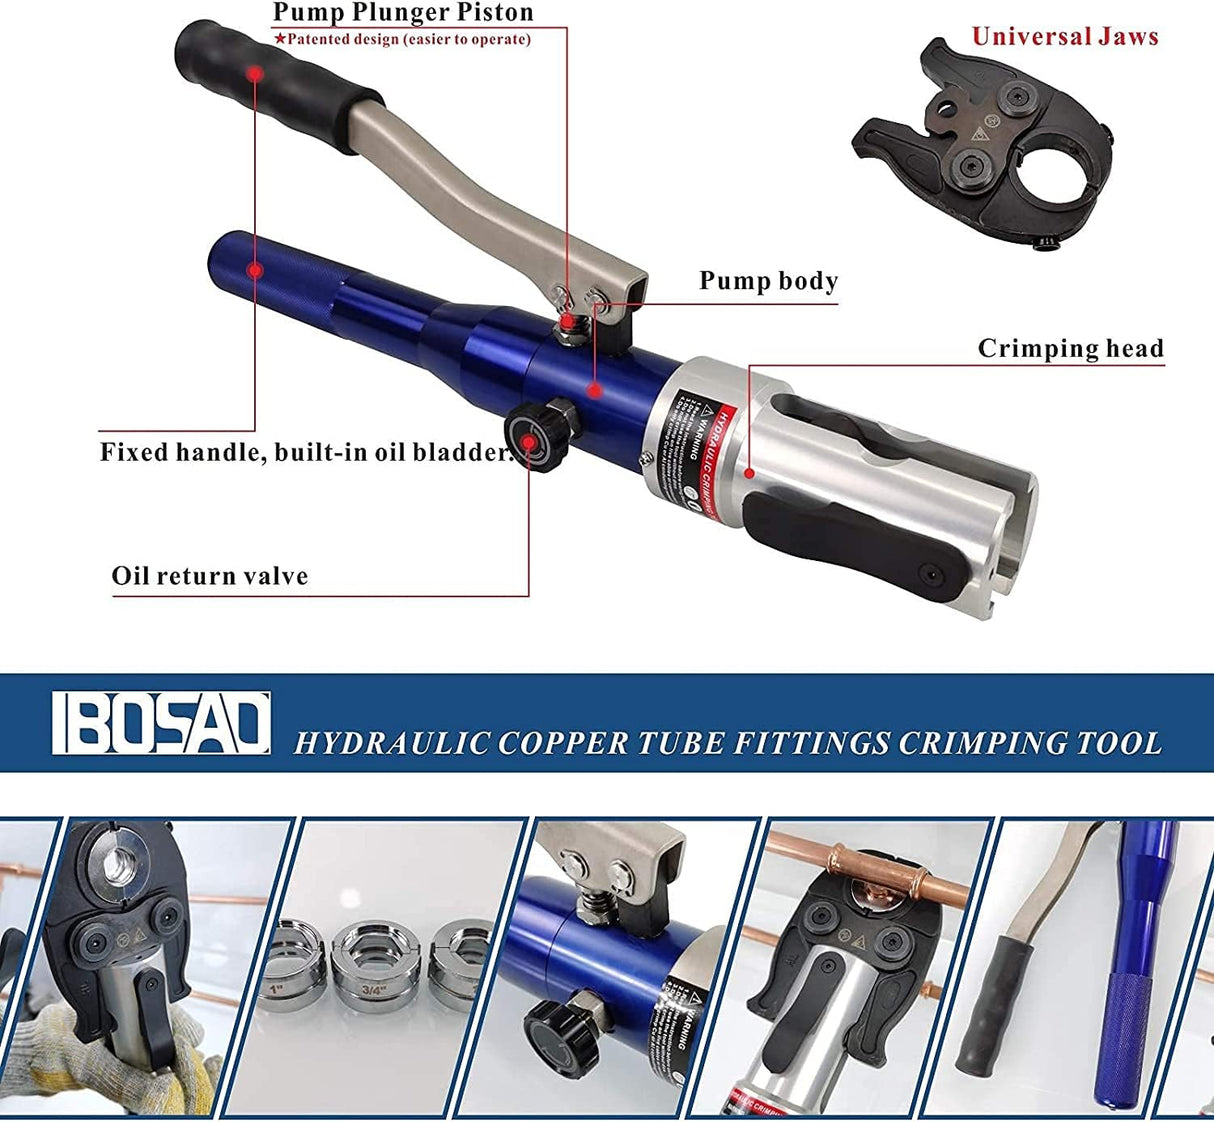 IBOSAD Copper Tube Fittings Hydraulic Pipe Crimping Tool with 1/2 inch,3/4 inch and 1 inch Jaw Copper Pipe Propress Crimpers Pressing Pliers